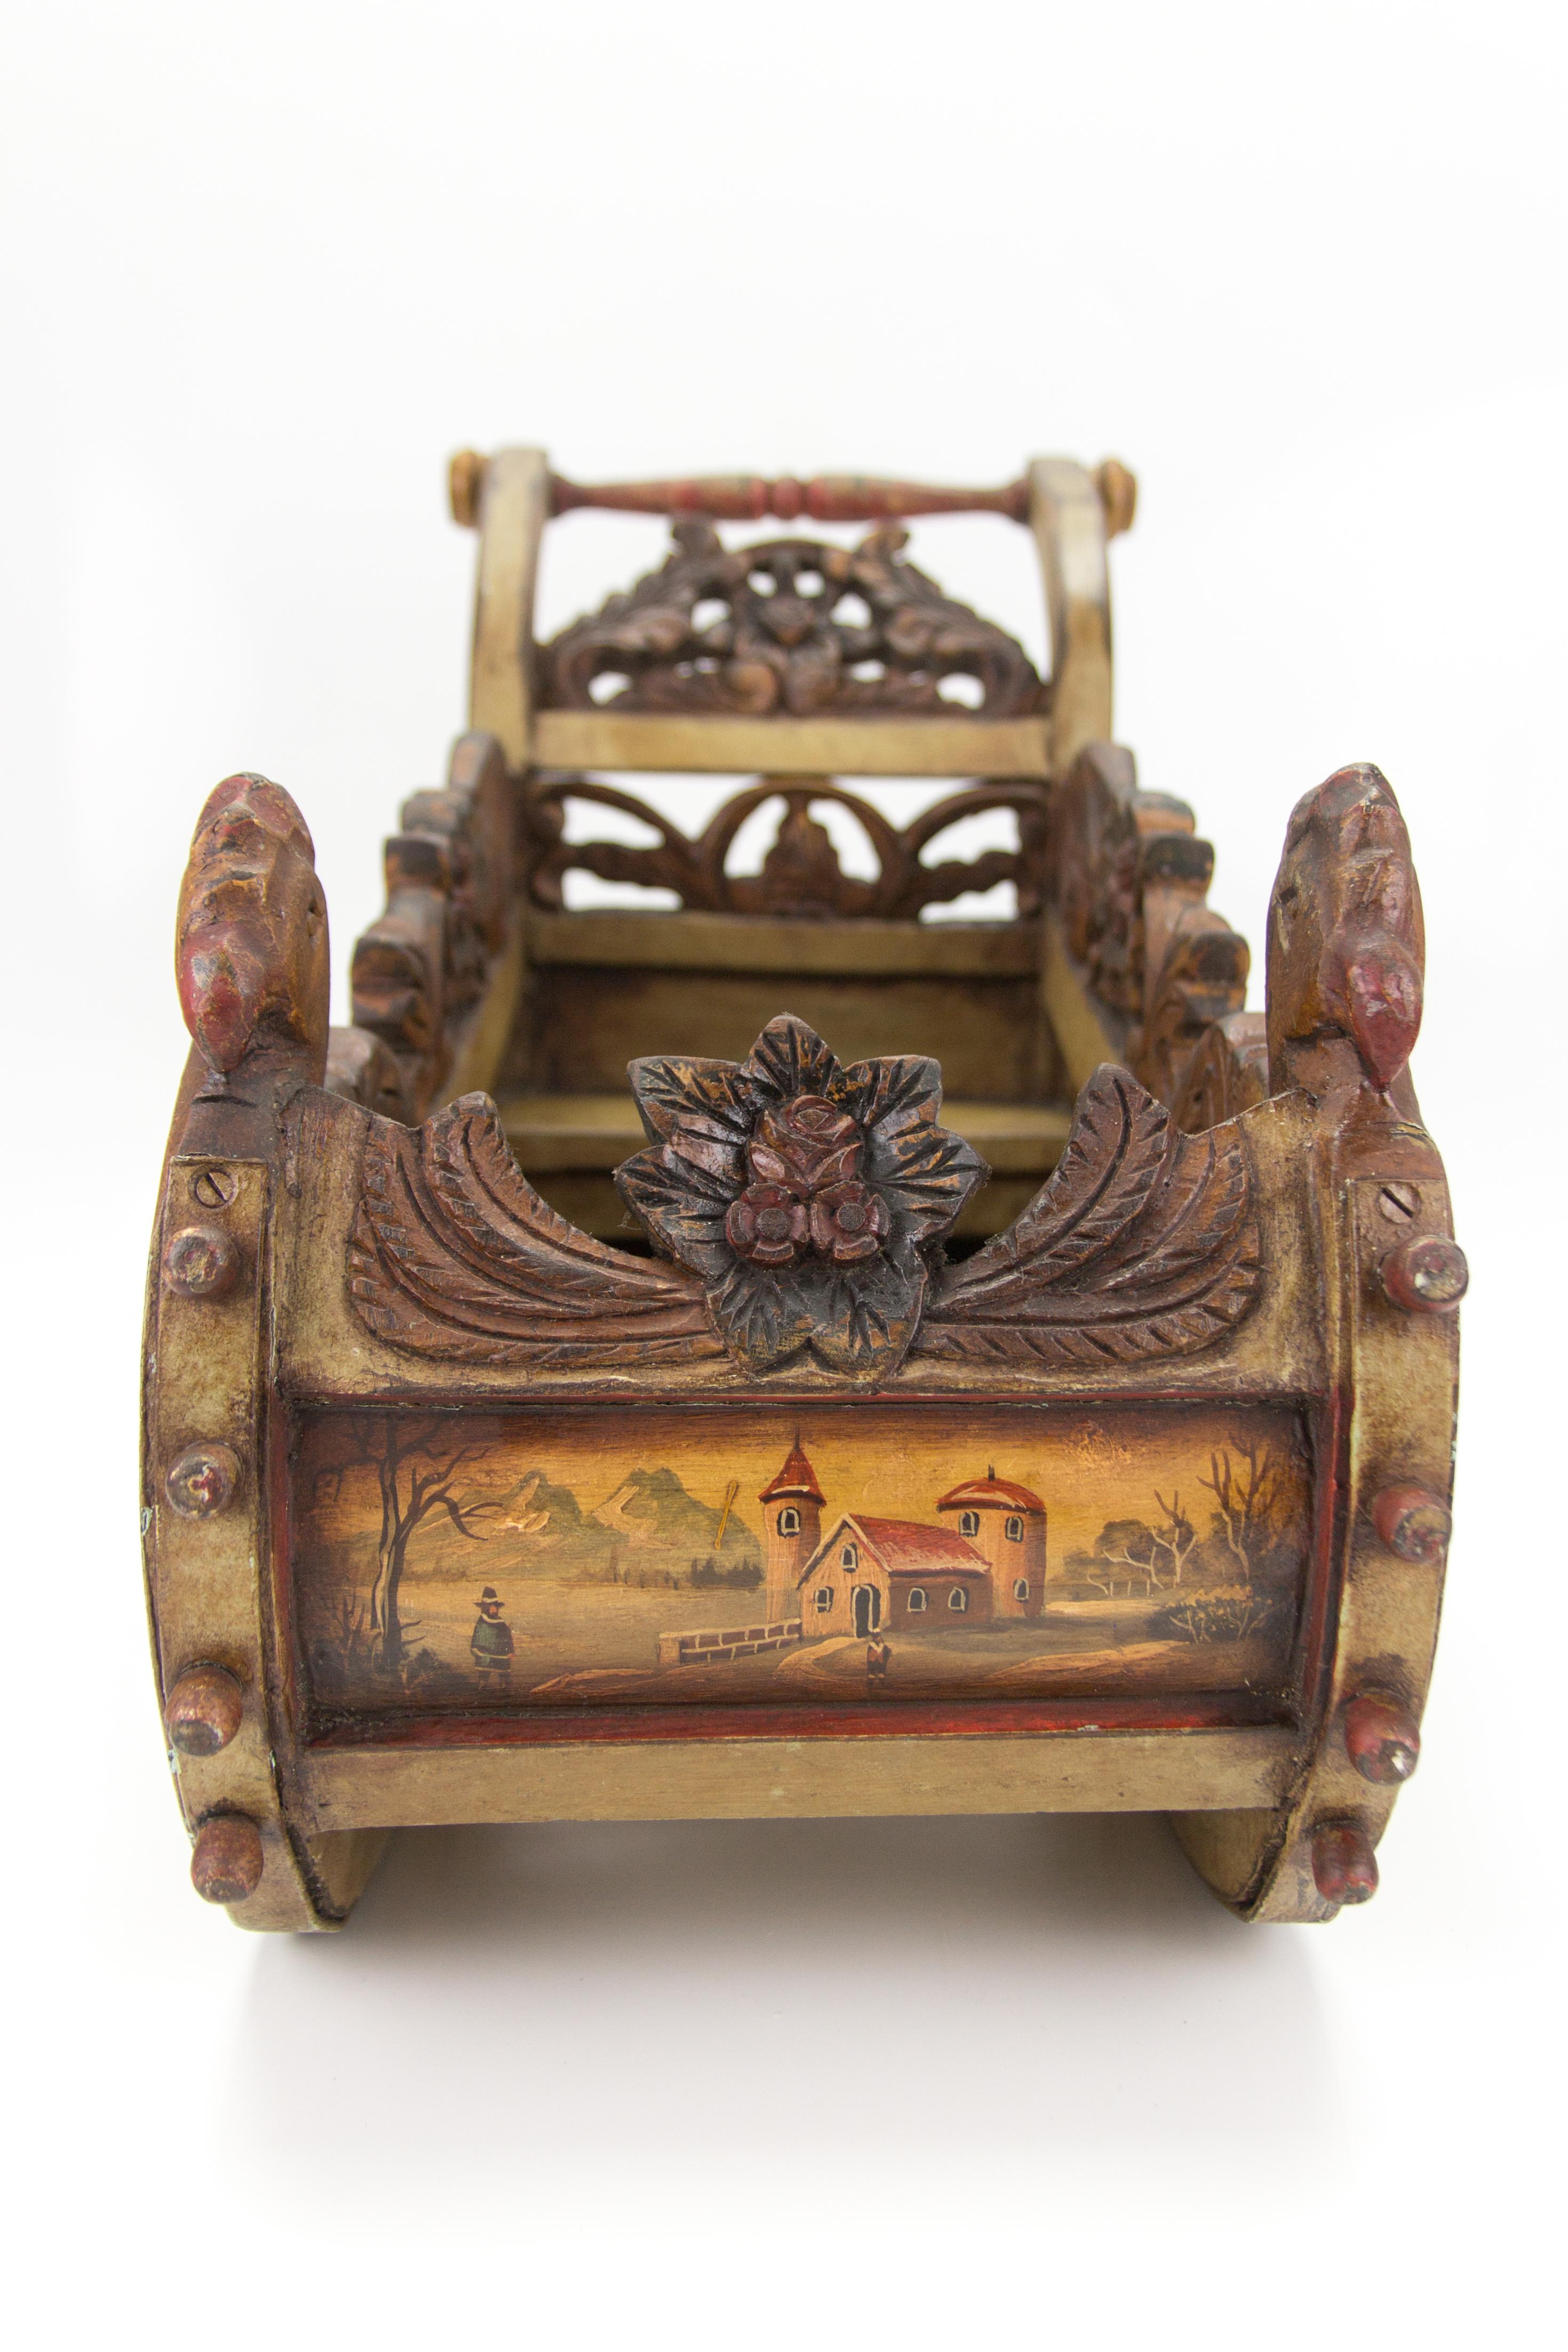 This gorgeous genuinely handcrafted thick wooden sleigh features floral motif carving and imposing carved turkey heads on each side of the sleigh front. All sides are exquisitely hand painted and depict antique winter scenes - people near castles